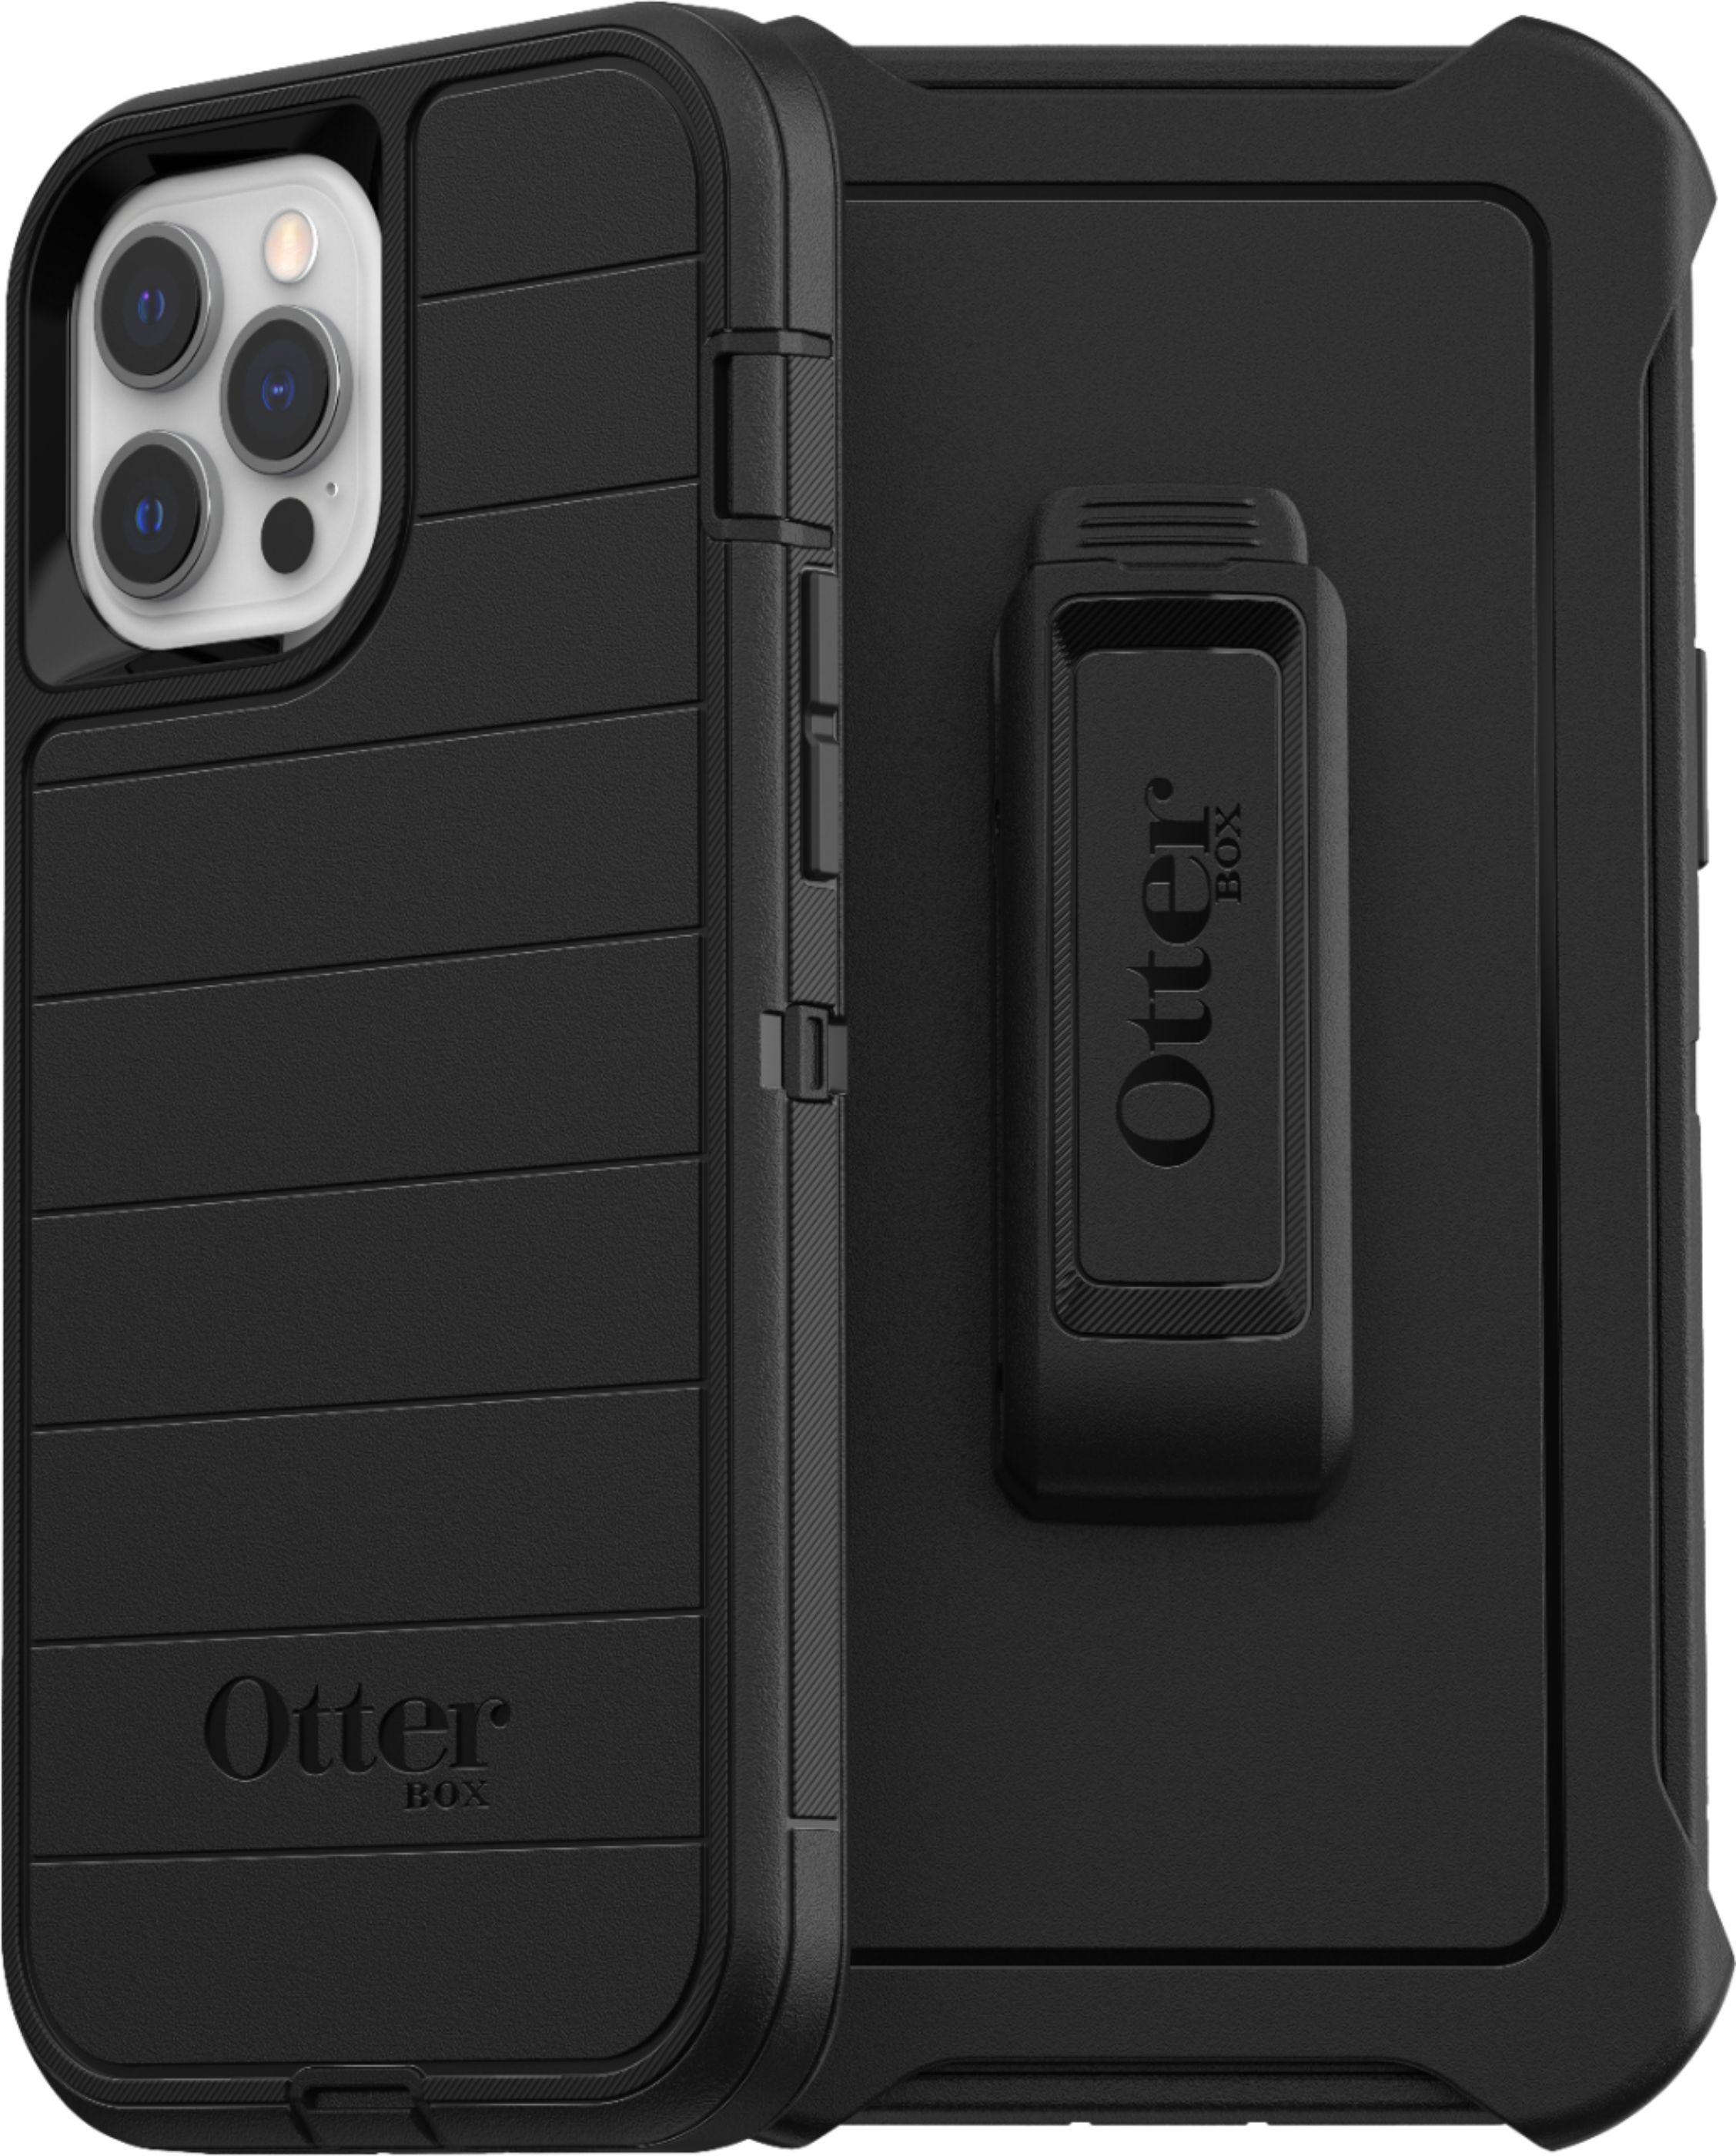 Angle View: OtterBox - Defender Series Pro Carrying Case for Apple® iPhone® 12 Pro Max - Black